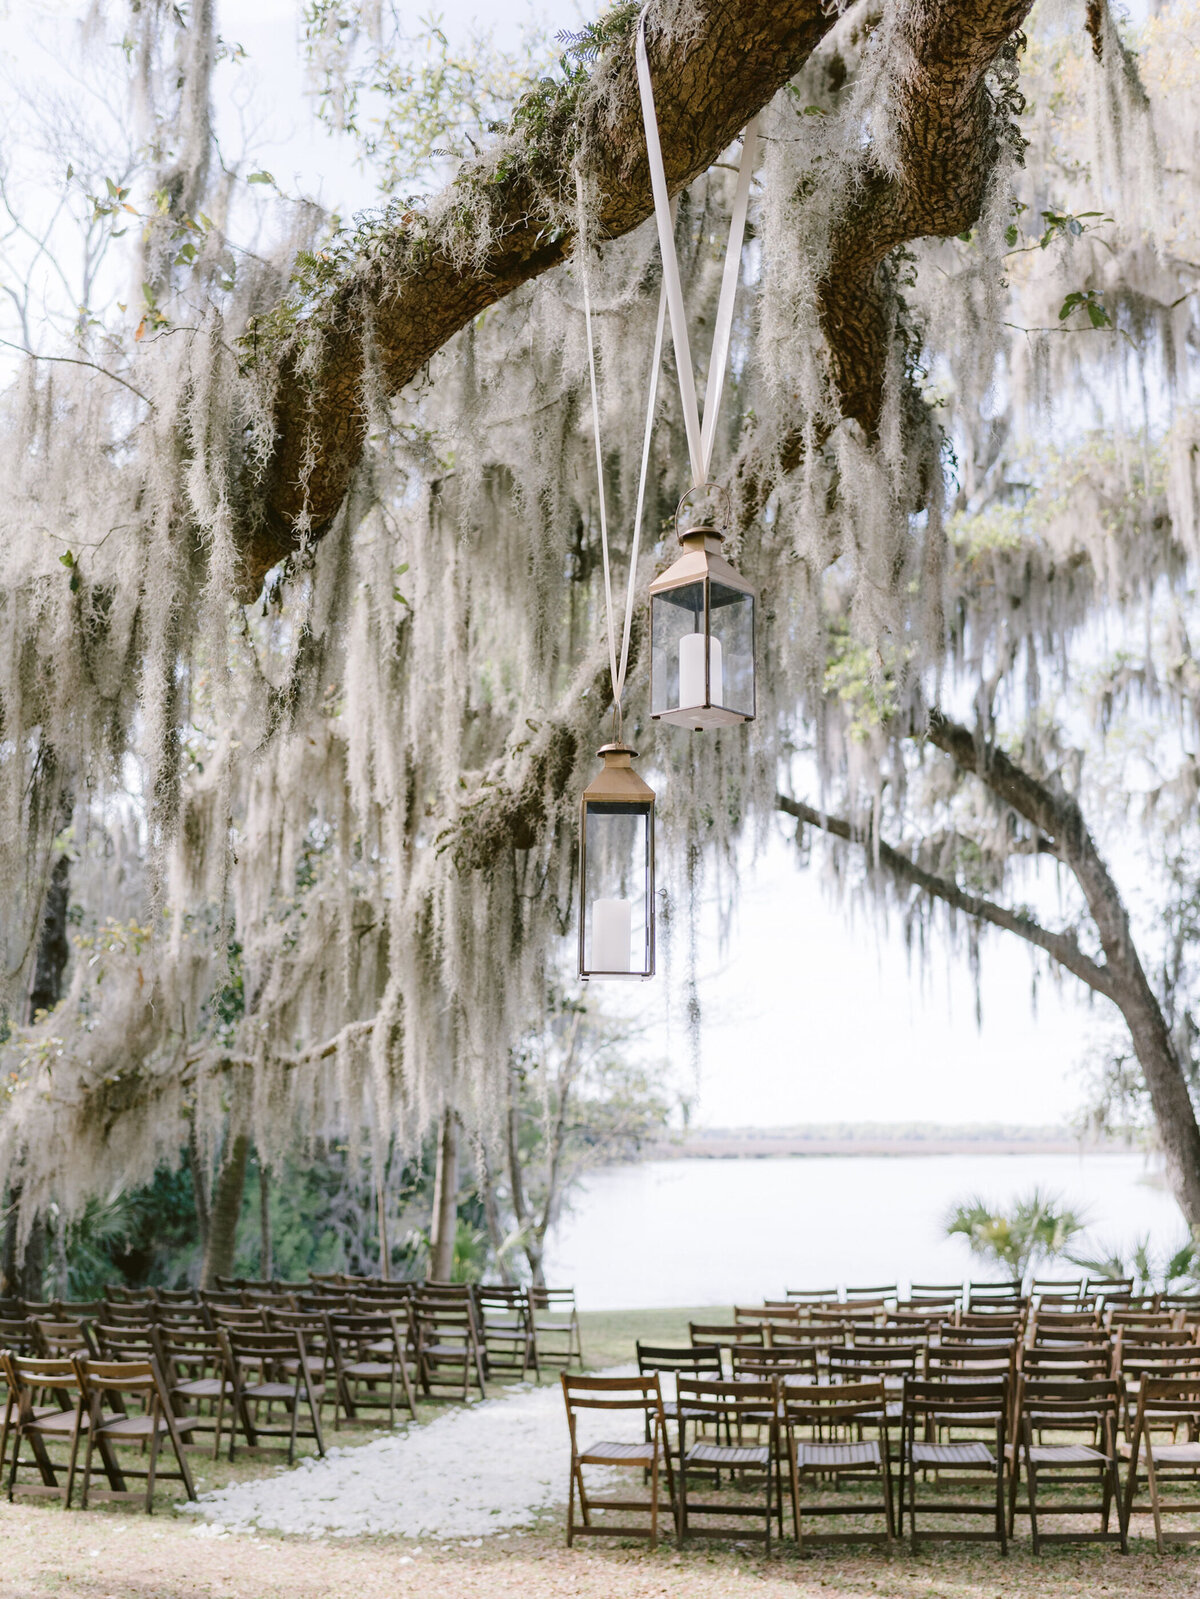 Ashley + Austin | Wedding at Runnymede by Pure Luxe Bride: Charleston Wedding and Event Planners